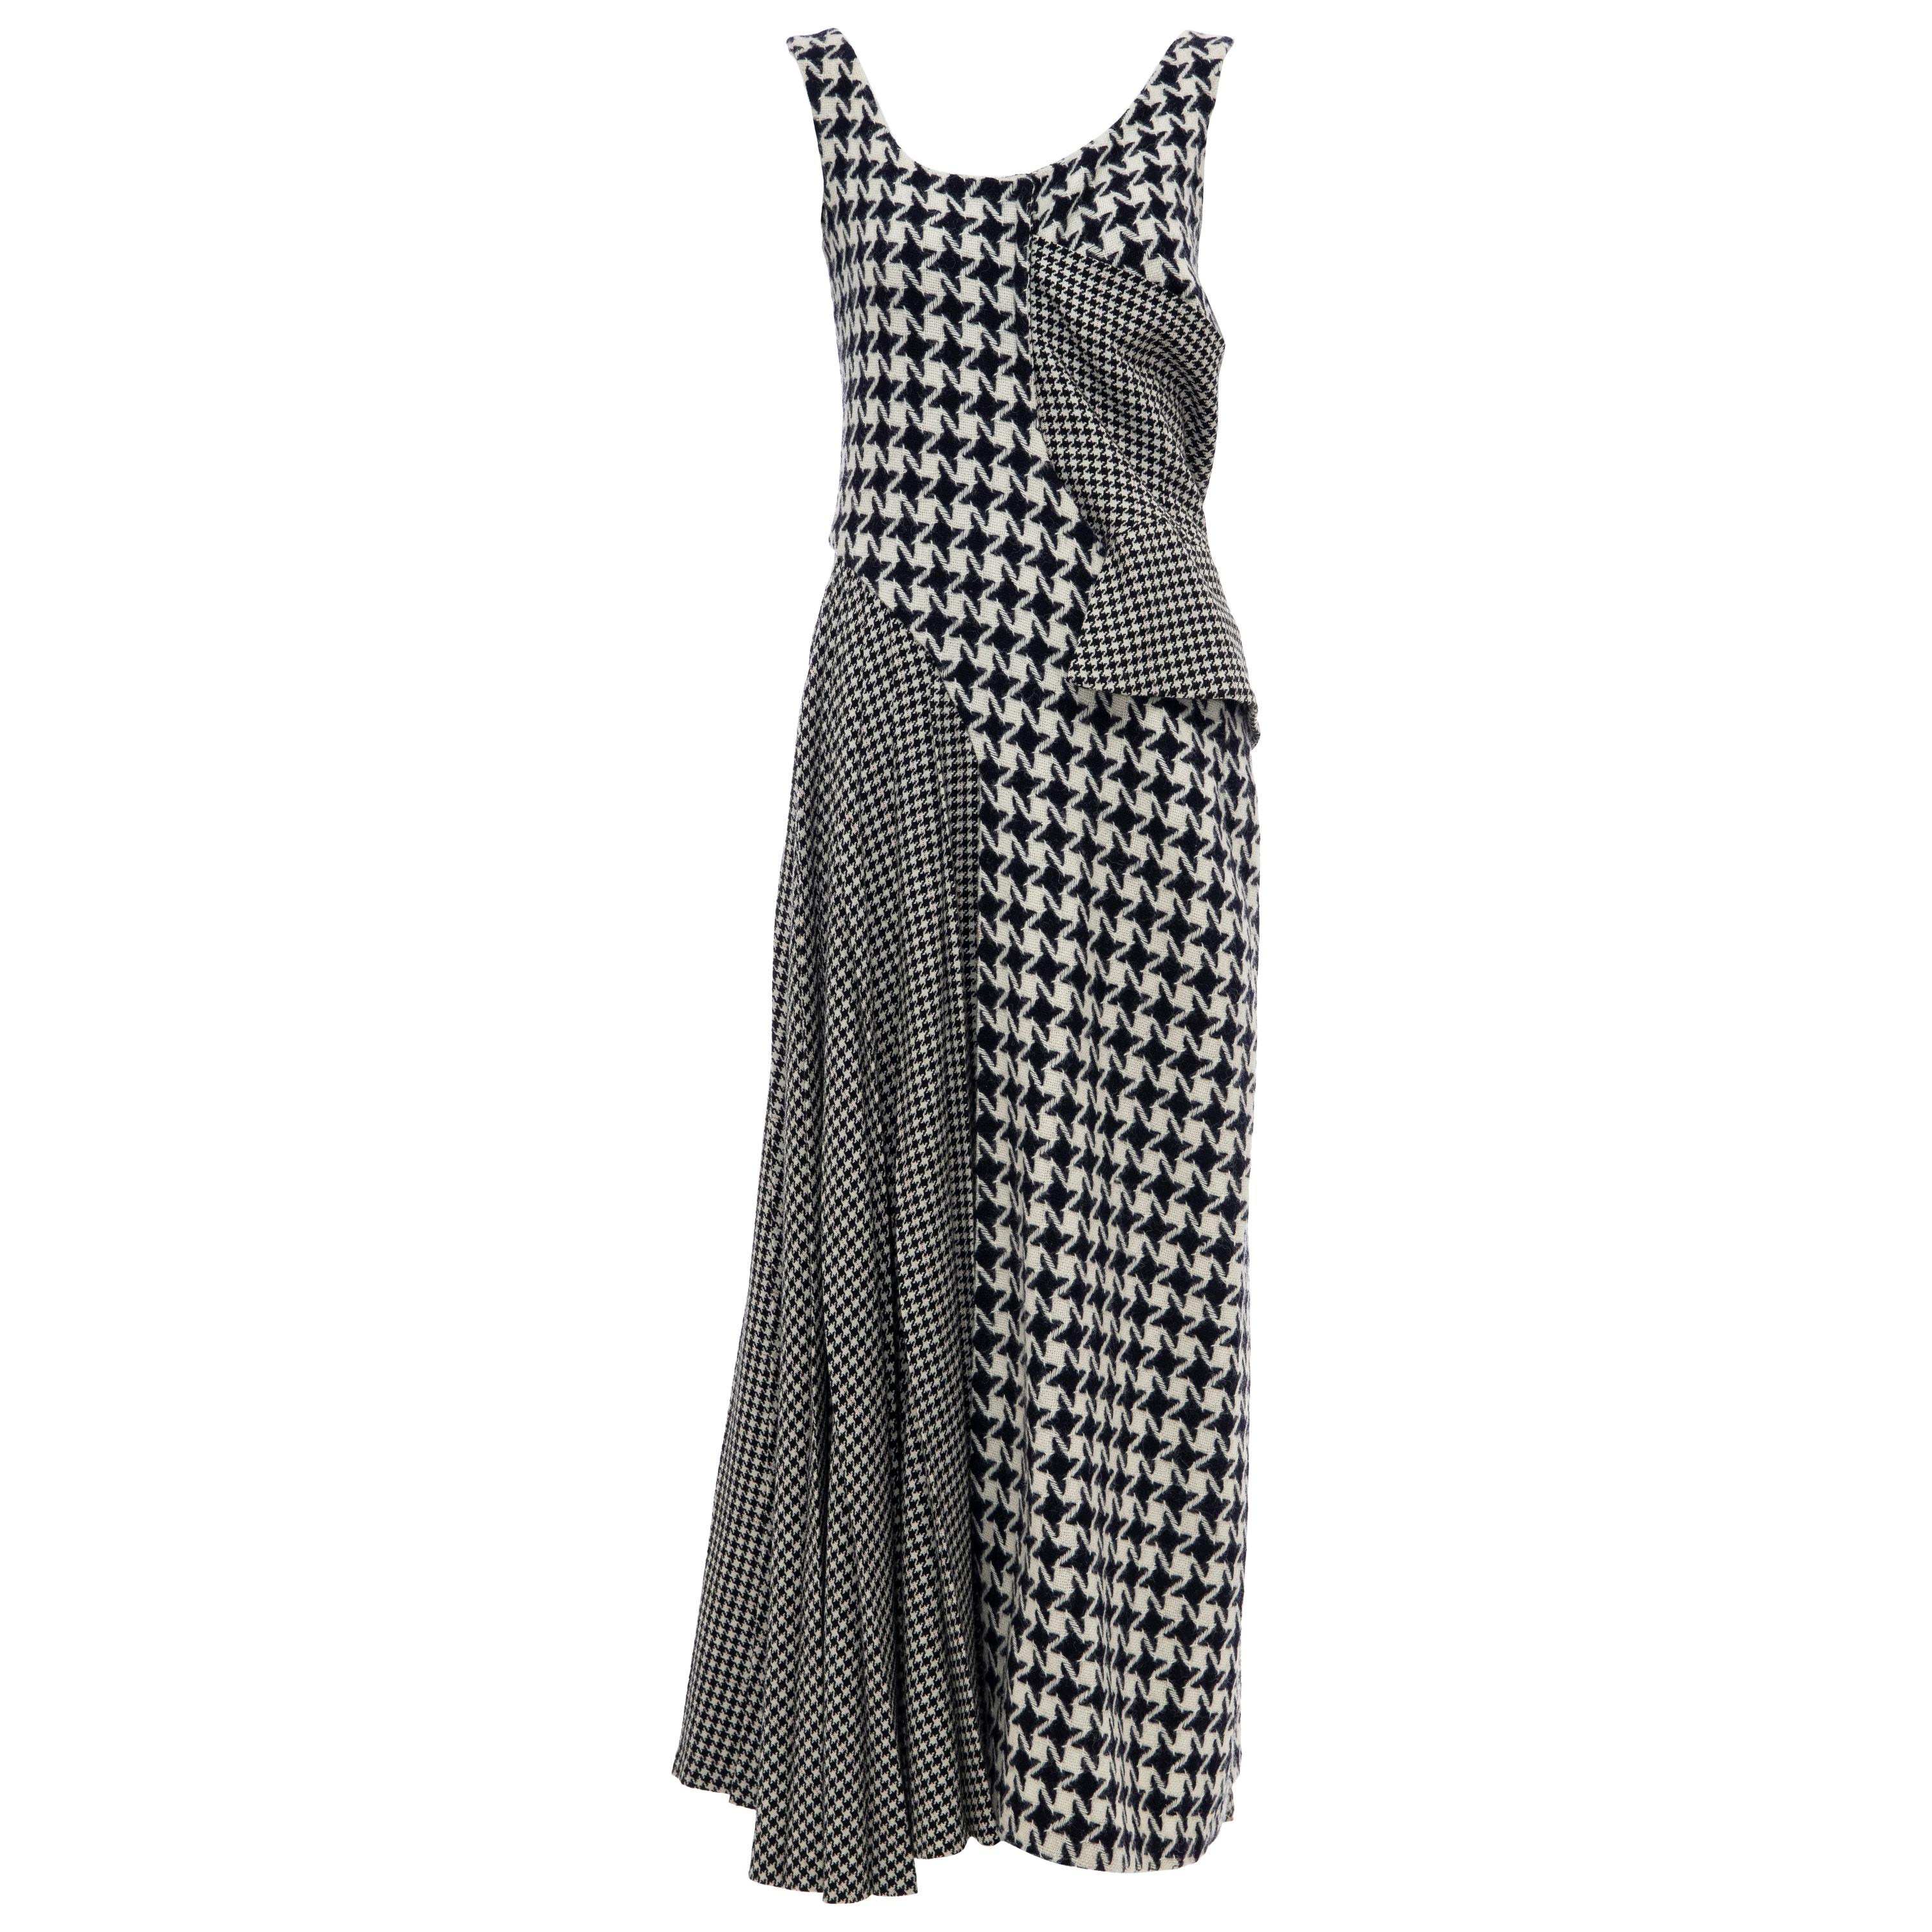 Yohji Yamamoto, Fall 2003 Runway wool sleeveless scoop neck dress featuring various sizes of houndstooth in both navy and black color ways, a side peplum and draped pleating at the right hip and back with concealed snap closures at back.

 Designer